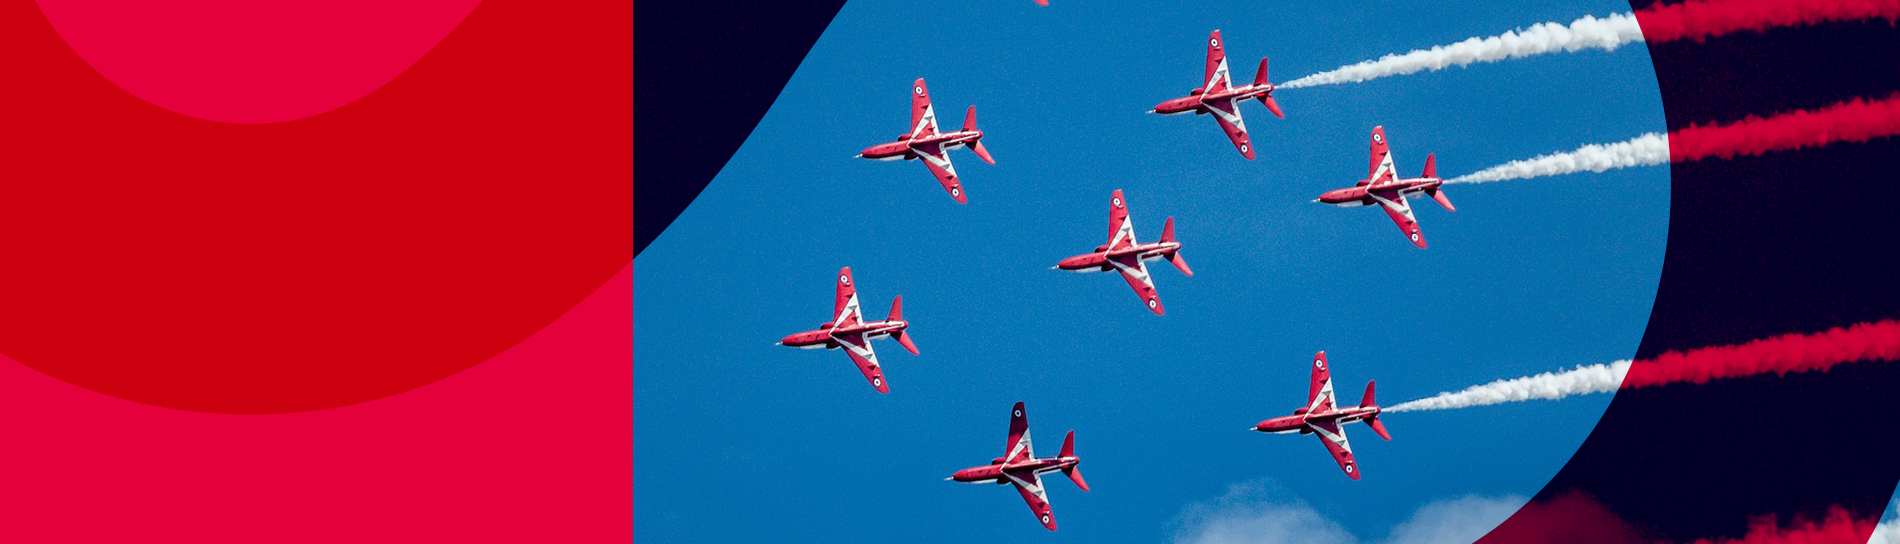 Our people option - red arrows